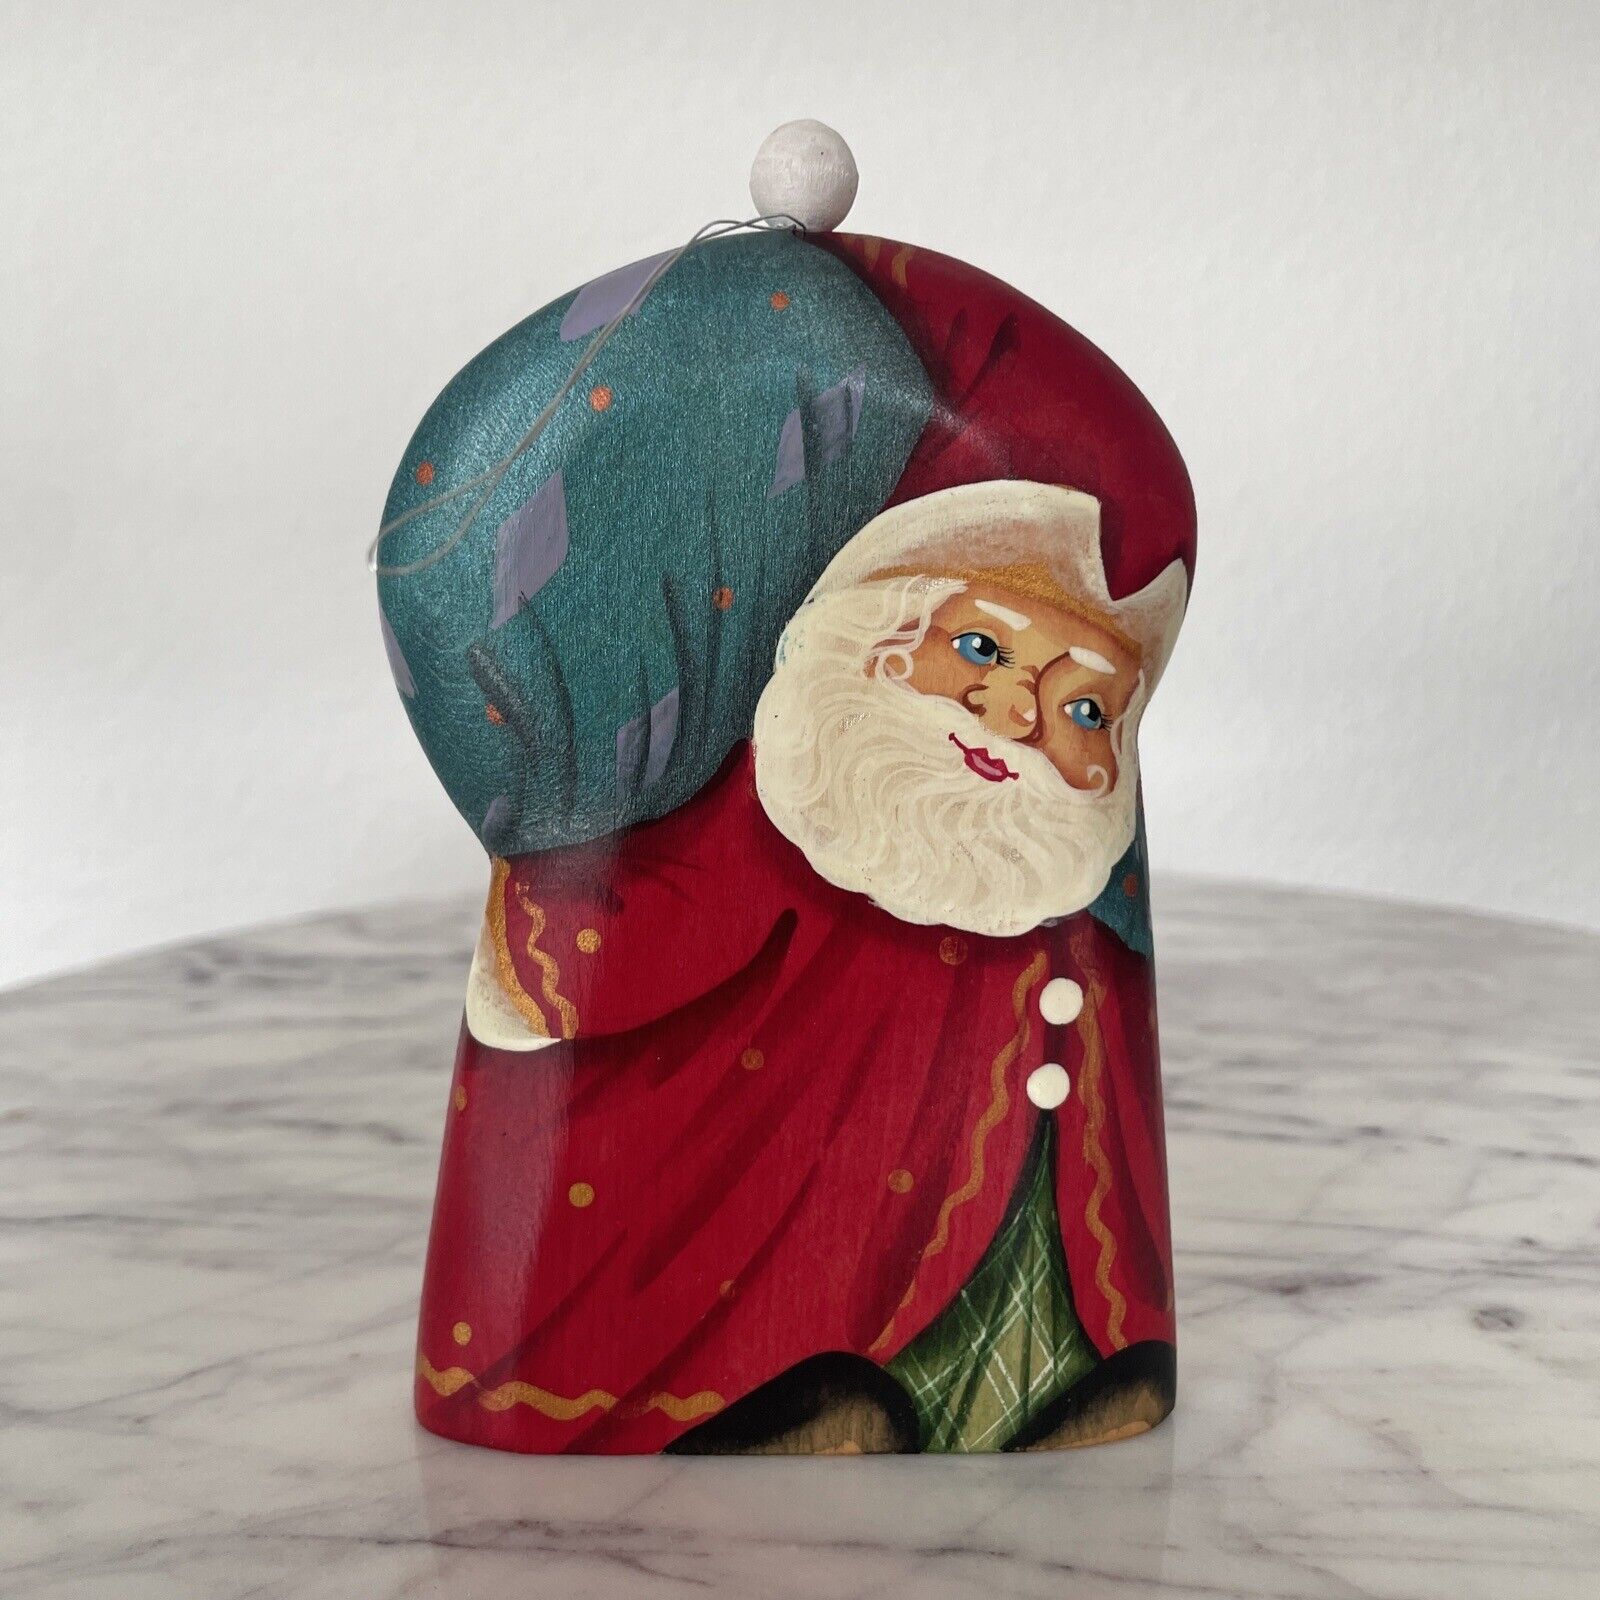 Hand Painted Wooden Santa Claus Christmas Ornament Signed Adorable Whimsical